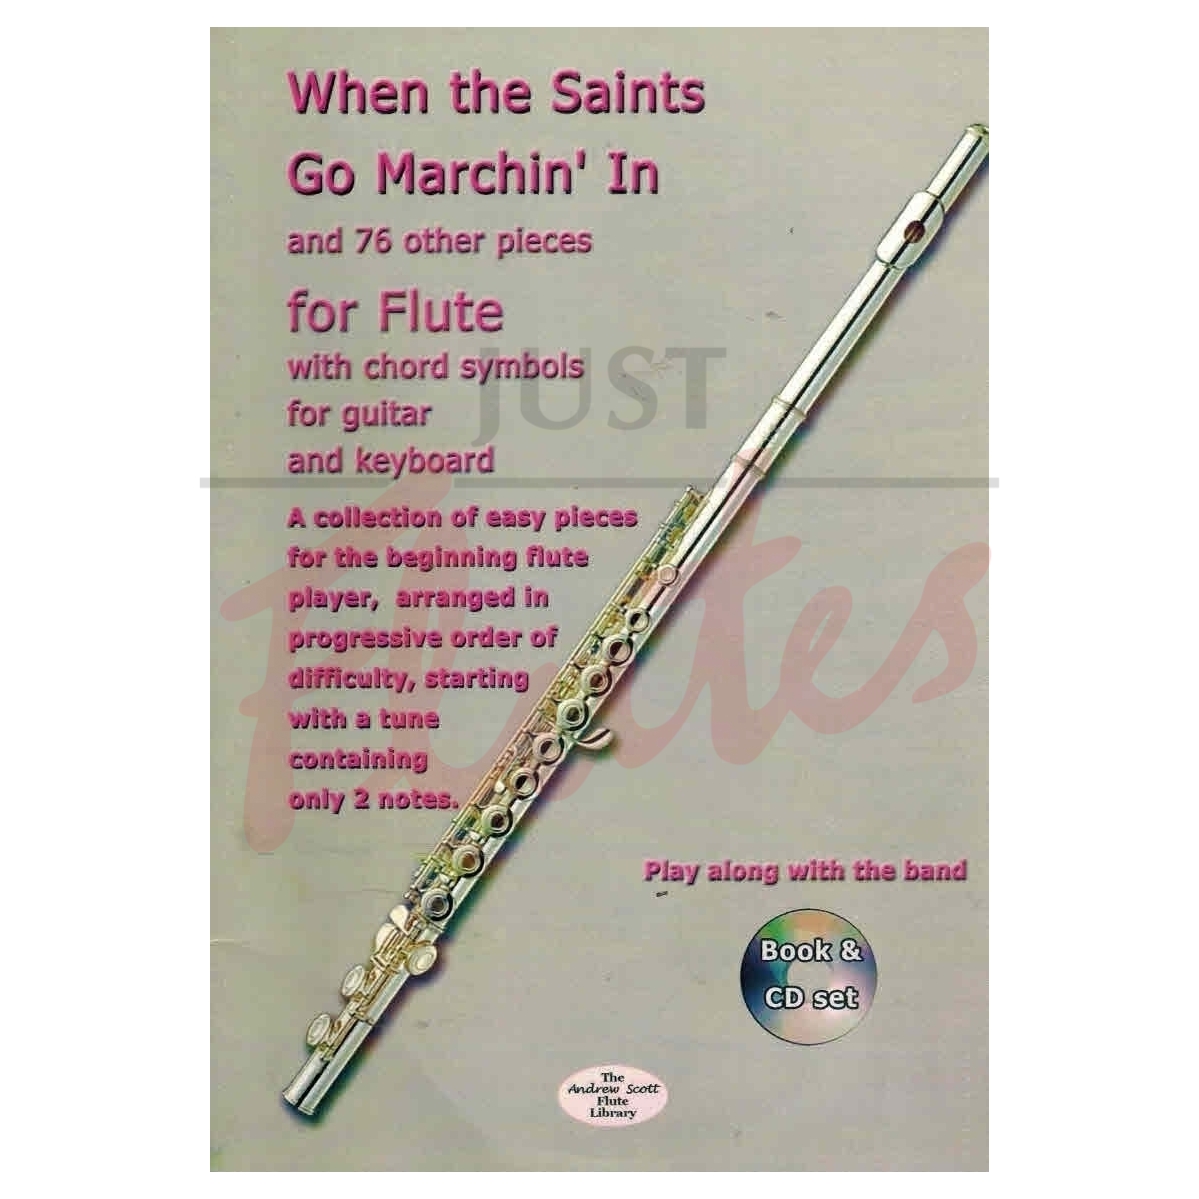 When The Saints Go Marchin' In, and 76 Other Pieces